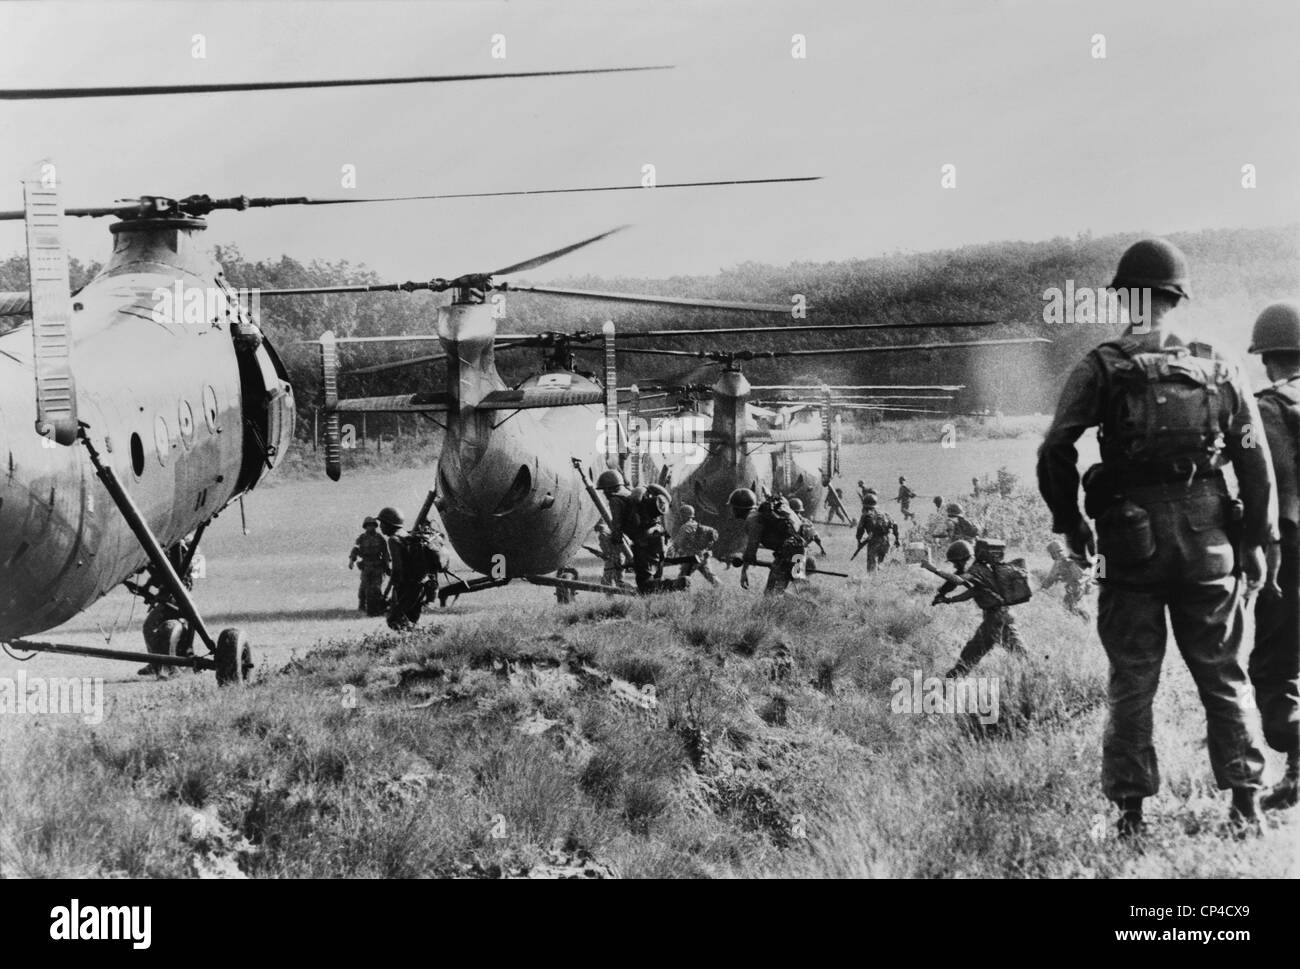 Vietnam War. South Vietnamese troops run to board helicopters for an airborne anti-guerrilla operation in jungles near Saigon, Stock Photo